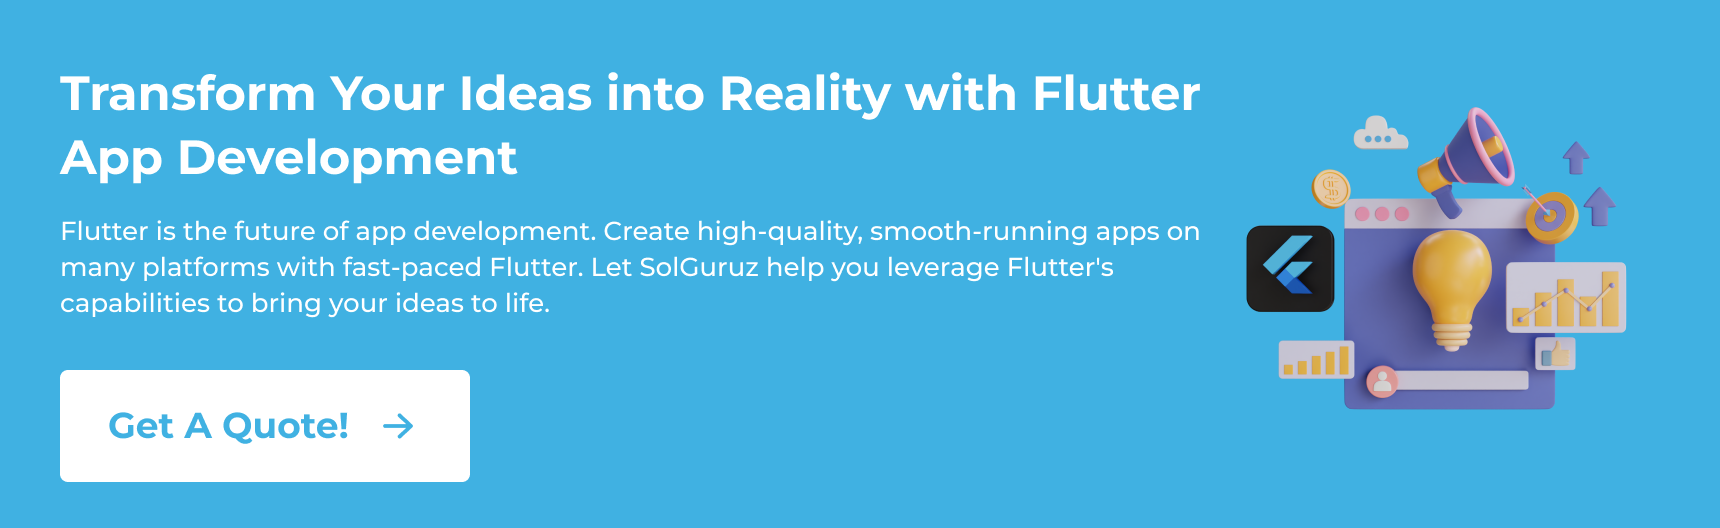 Transform Your Ideas into Reality with Flutter App Development. Flutter is the future of app development.